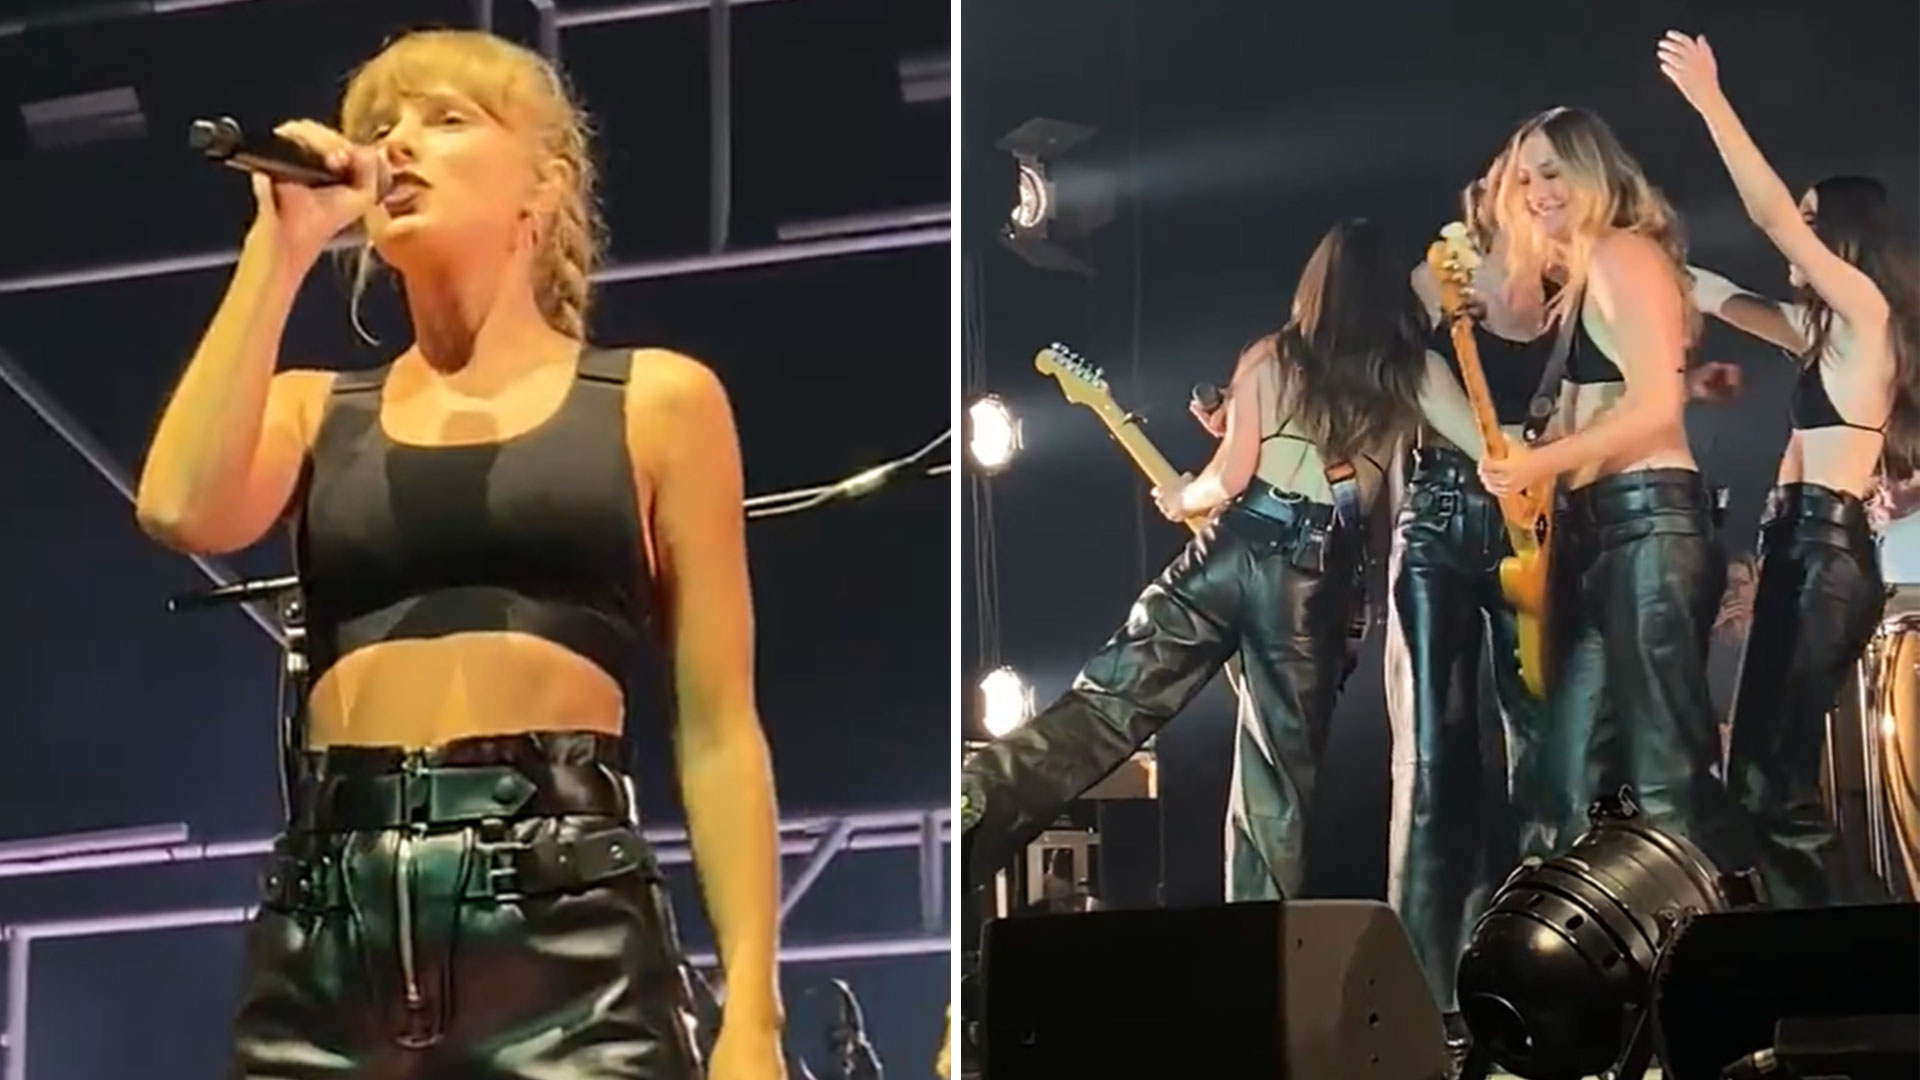 Brits are shocked to see Taylor Swift, Moment’s superstar, at the Haim gig. It sent screaming fans wild